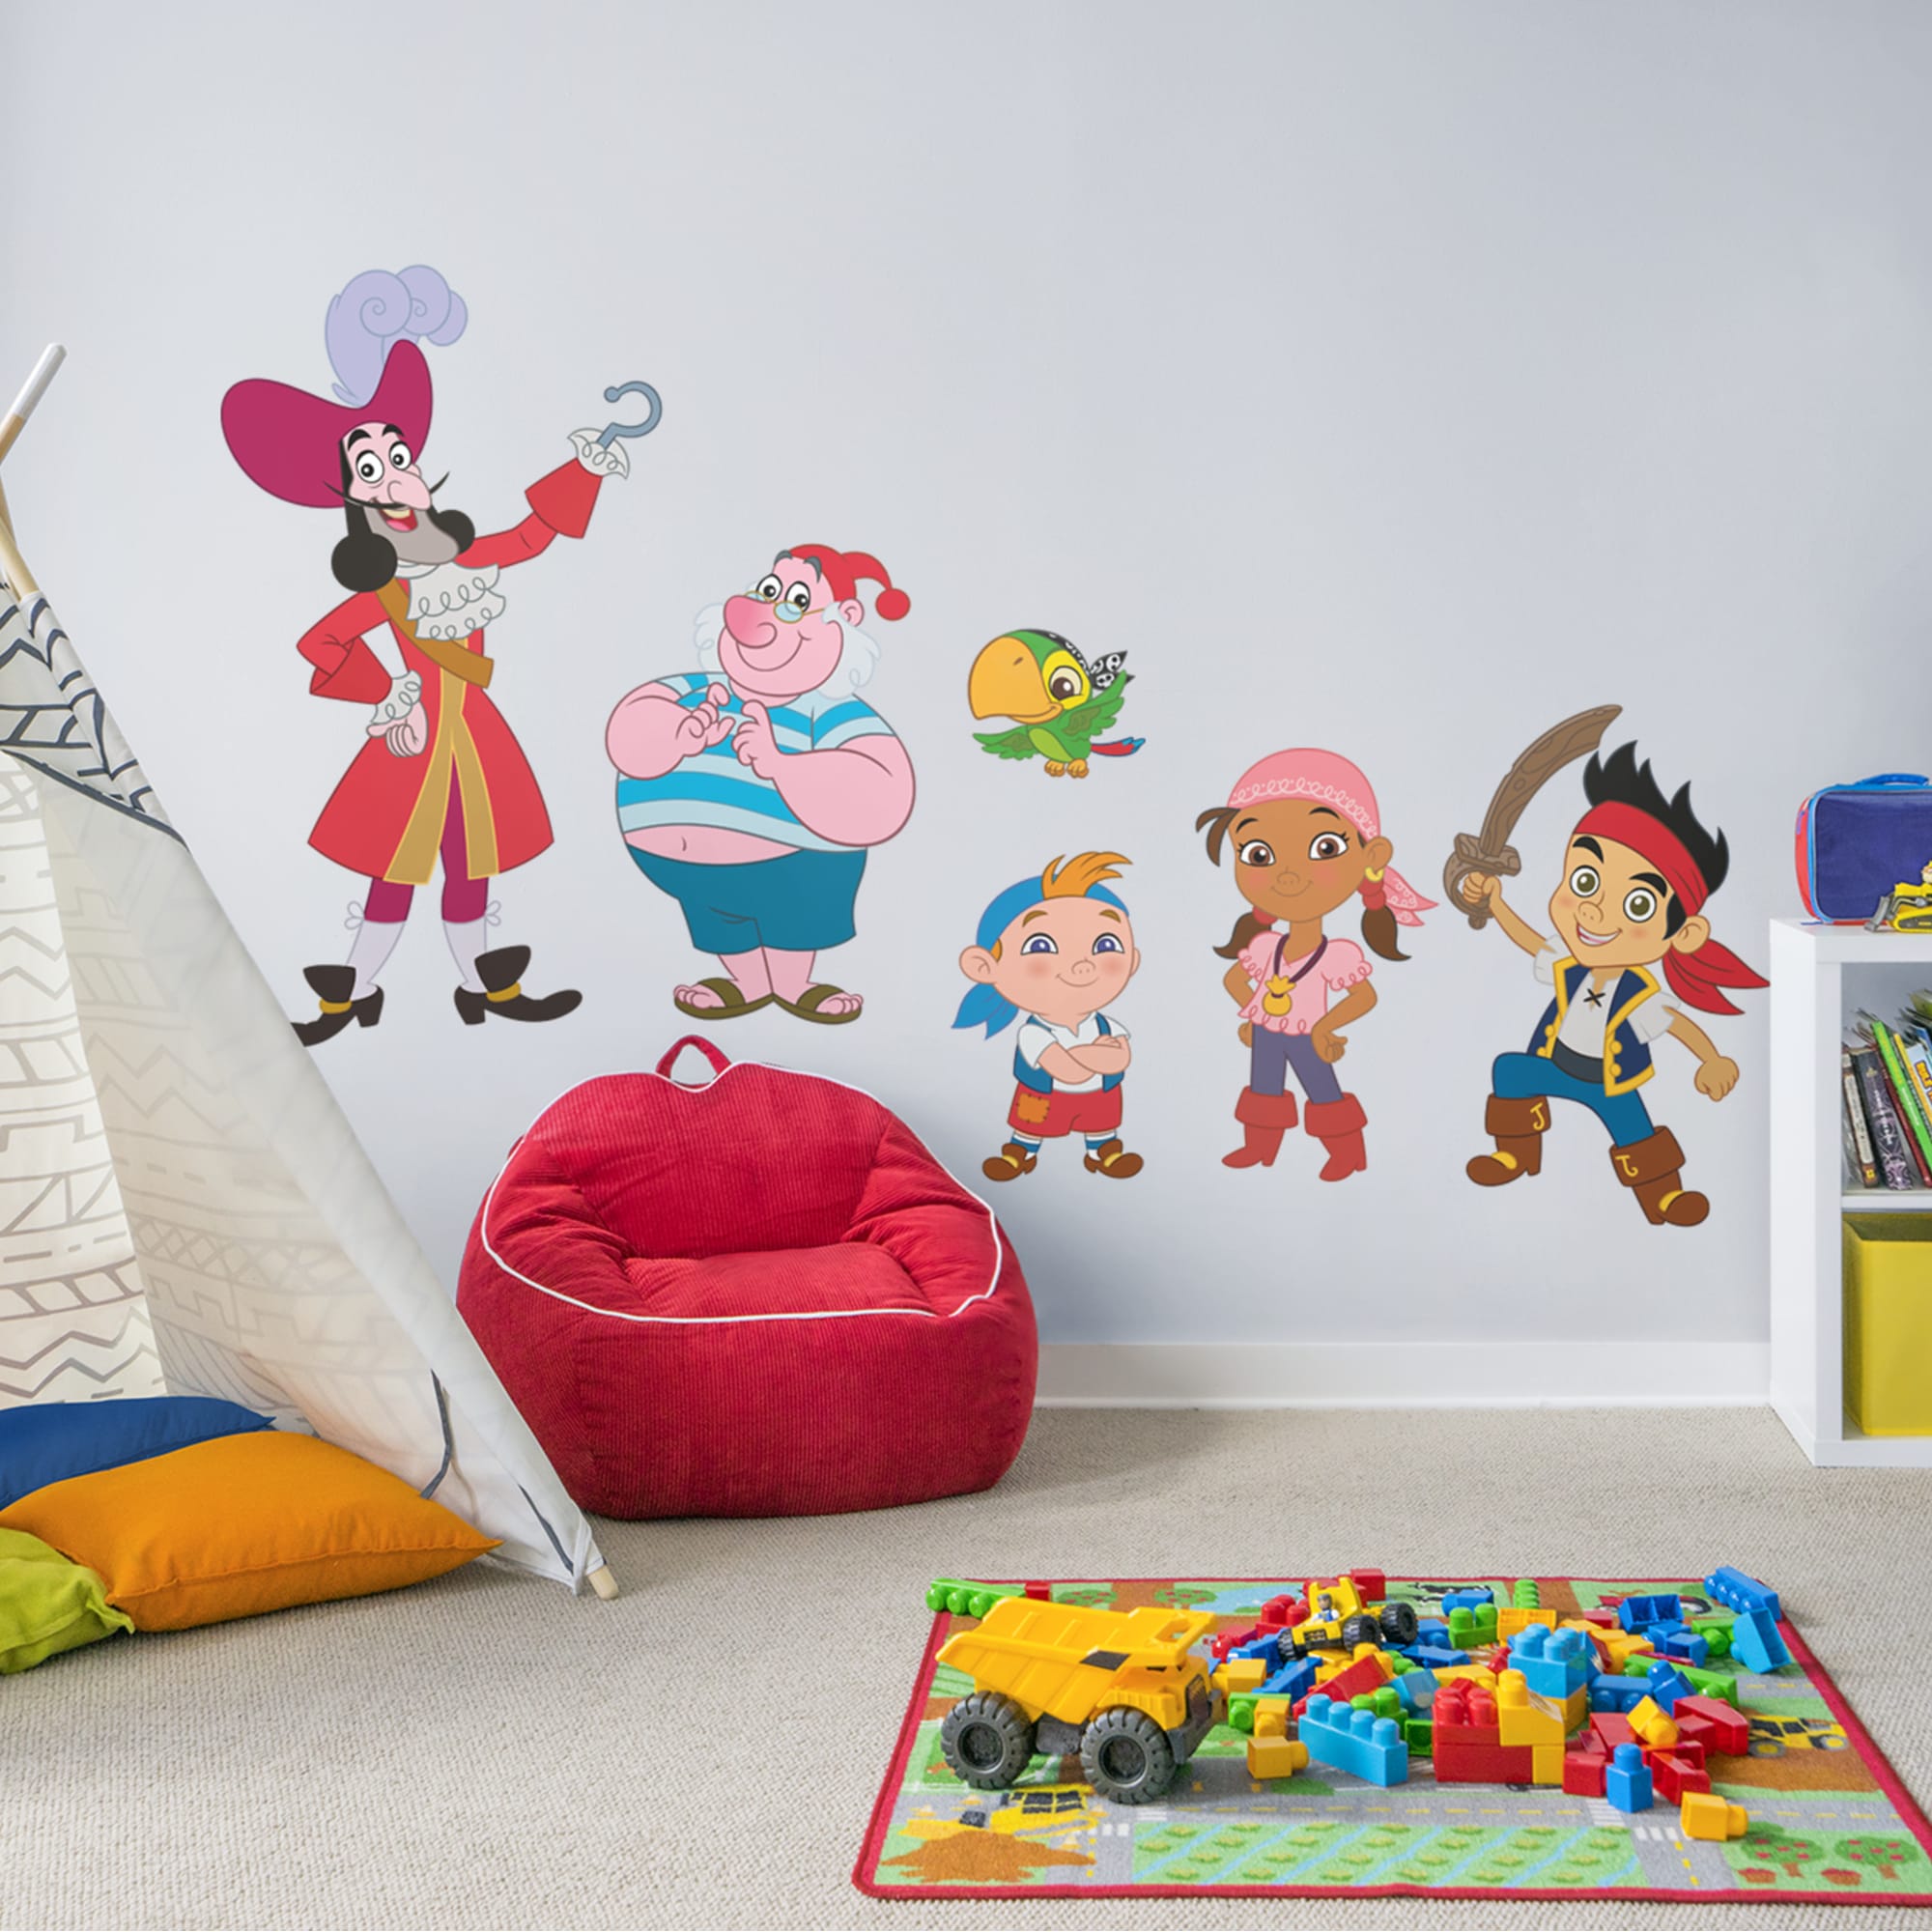 Jake and the Neverland Pirates: Collection - Officially Licensed Disney Removable Wall Decals 79.0"W x 52.0"H by Fathead | Vinyl